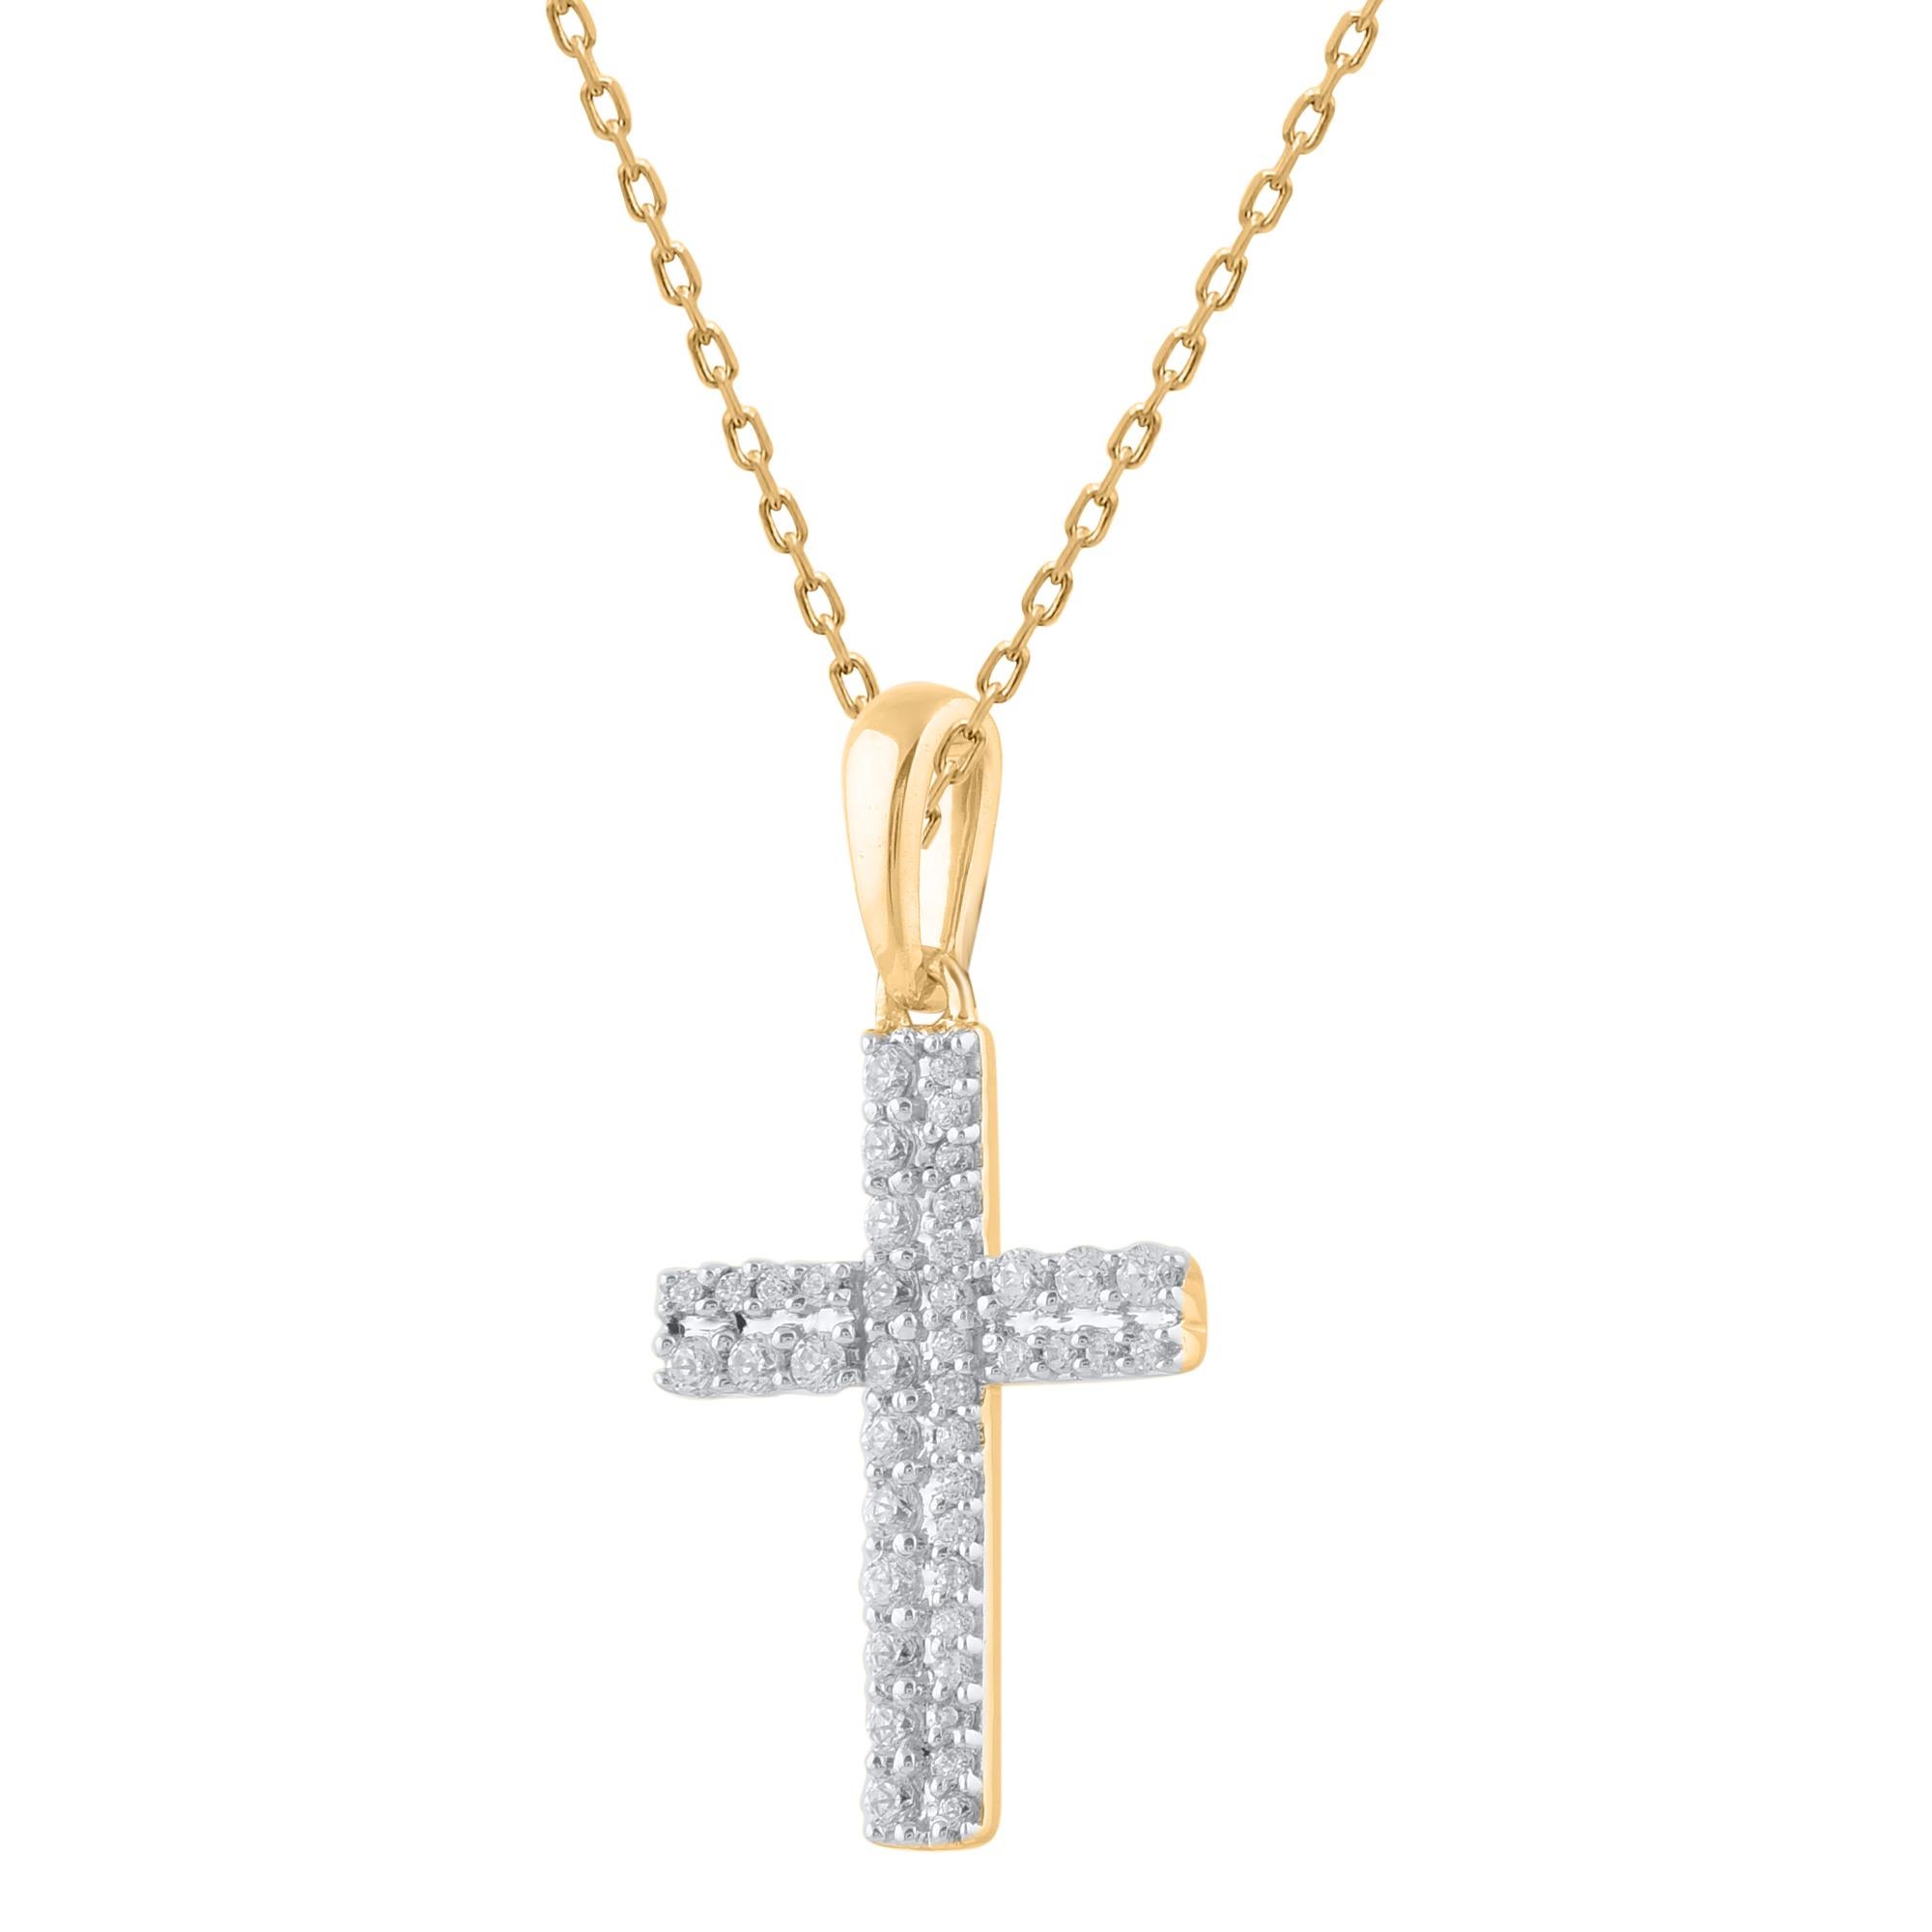 Make a bold statement of style and beliefs with the eye-catching elegance of this diamond cross pendant.  Beautifully crafted by our inhouse experts in 14kt yellow gold and embellished with 42 round single cut & brilliant cut diamond set in prong